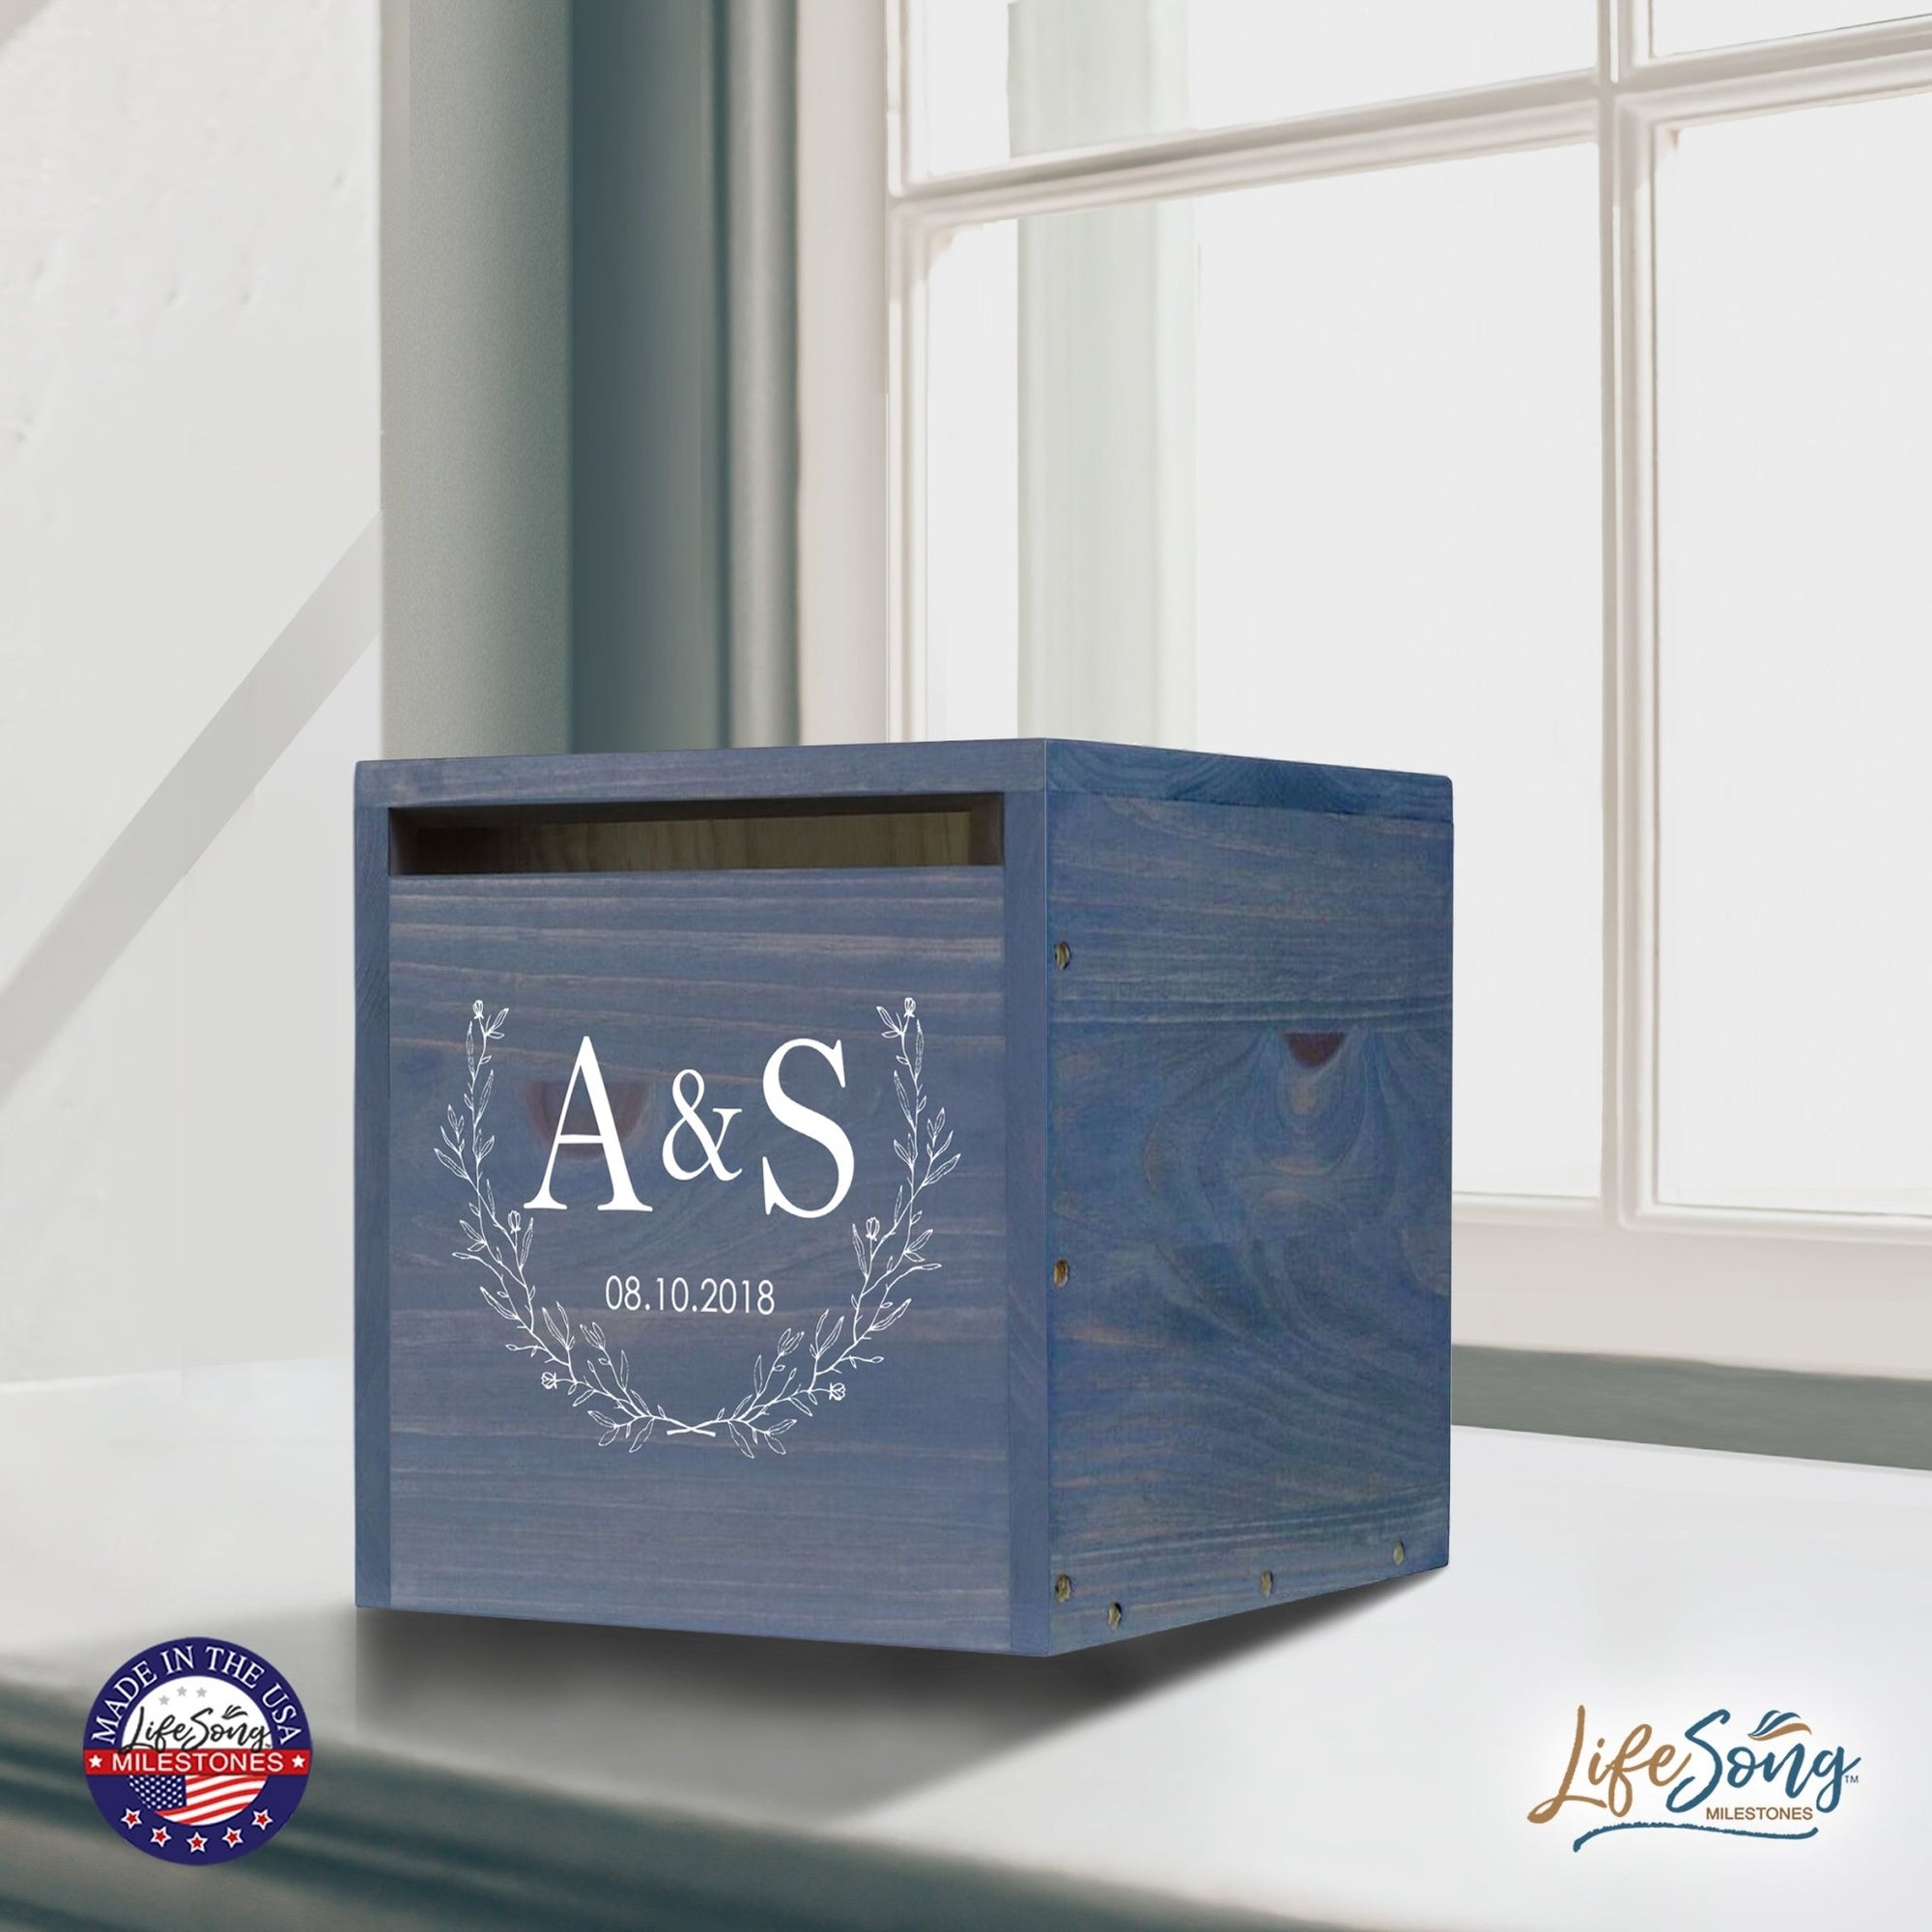 Personalized Wooden Card Box for Wedding Ceremonies, Venues, Receptions, Bridal Showers, and Engagement Parties 13.5x12 - A&S (Leaves) - LifeSong Milestones